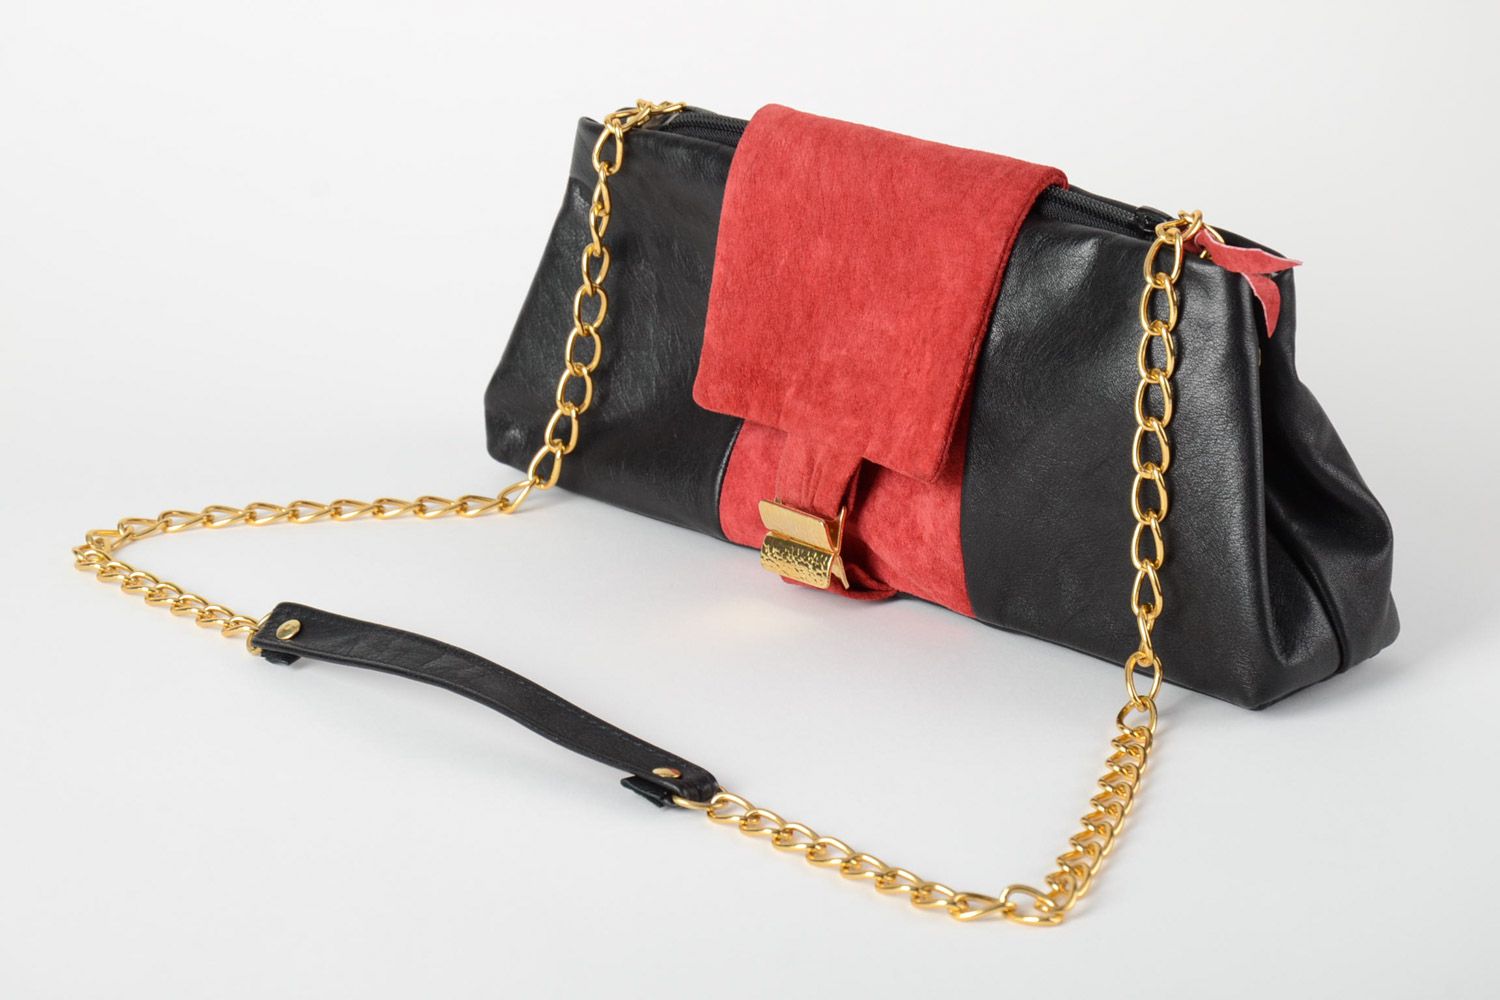 Handmade women's clutch bag sewn of black genuine leather with red inserts on chain photo 5